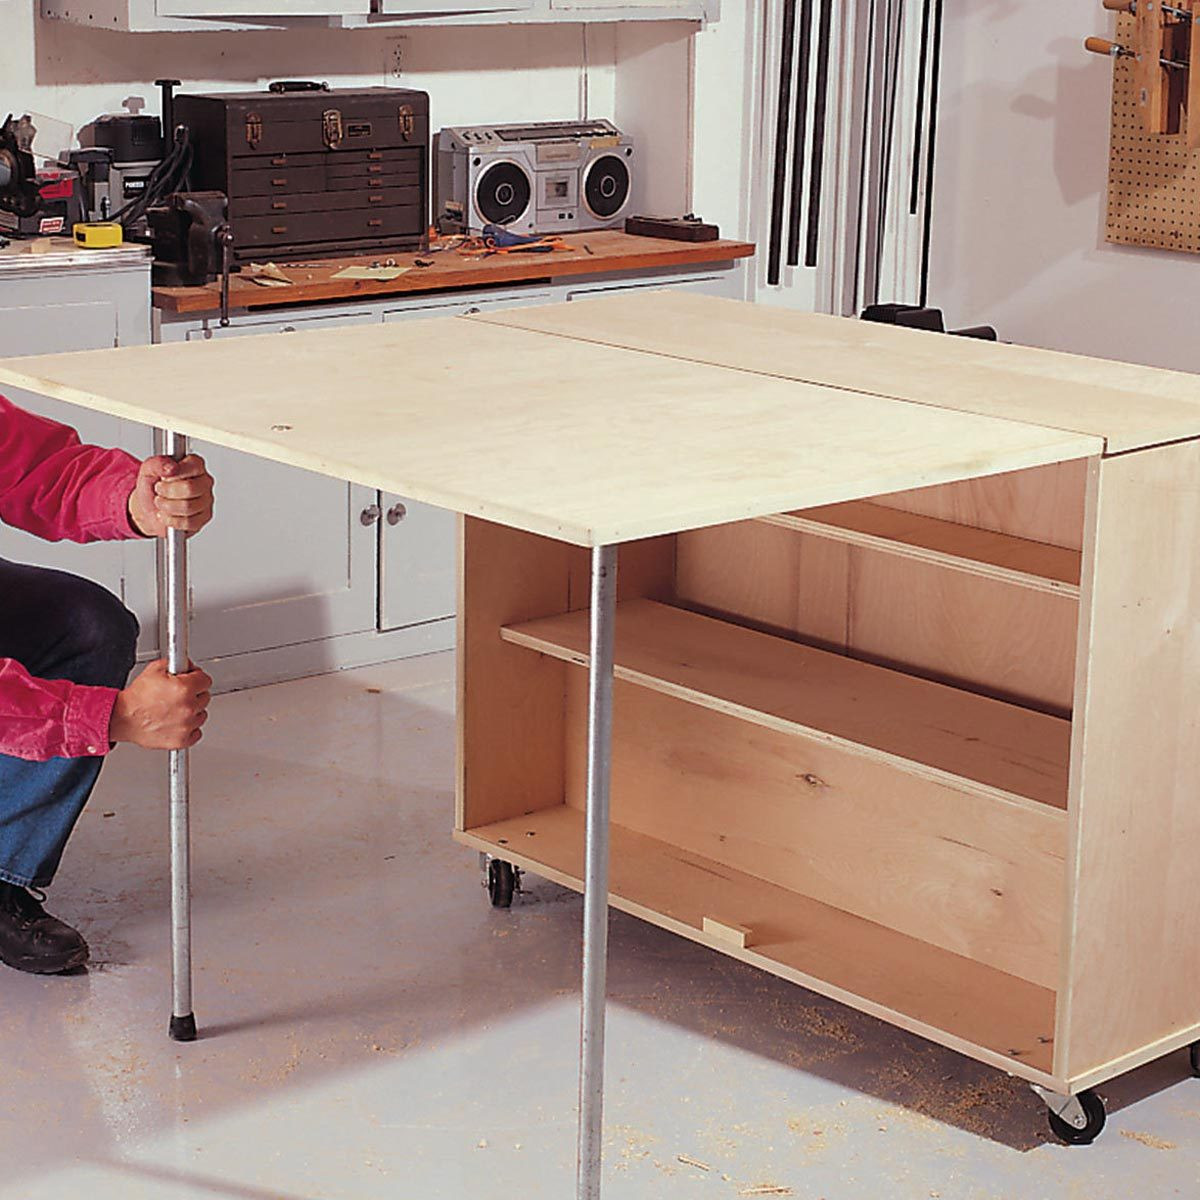 Children'S Table With Storage
 10 DIY Tables You Can Build Quickly — The Family Handyman